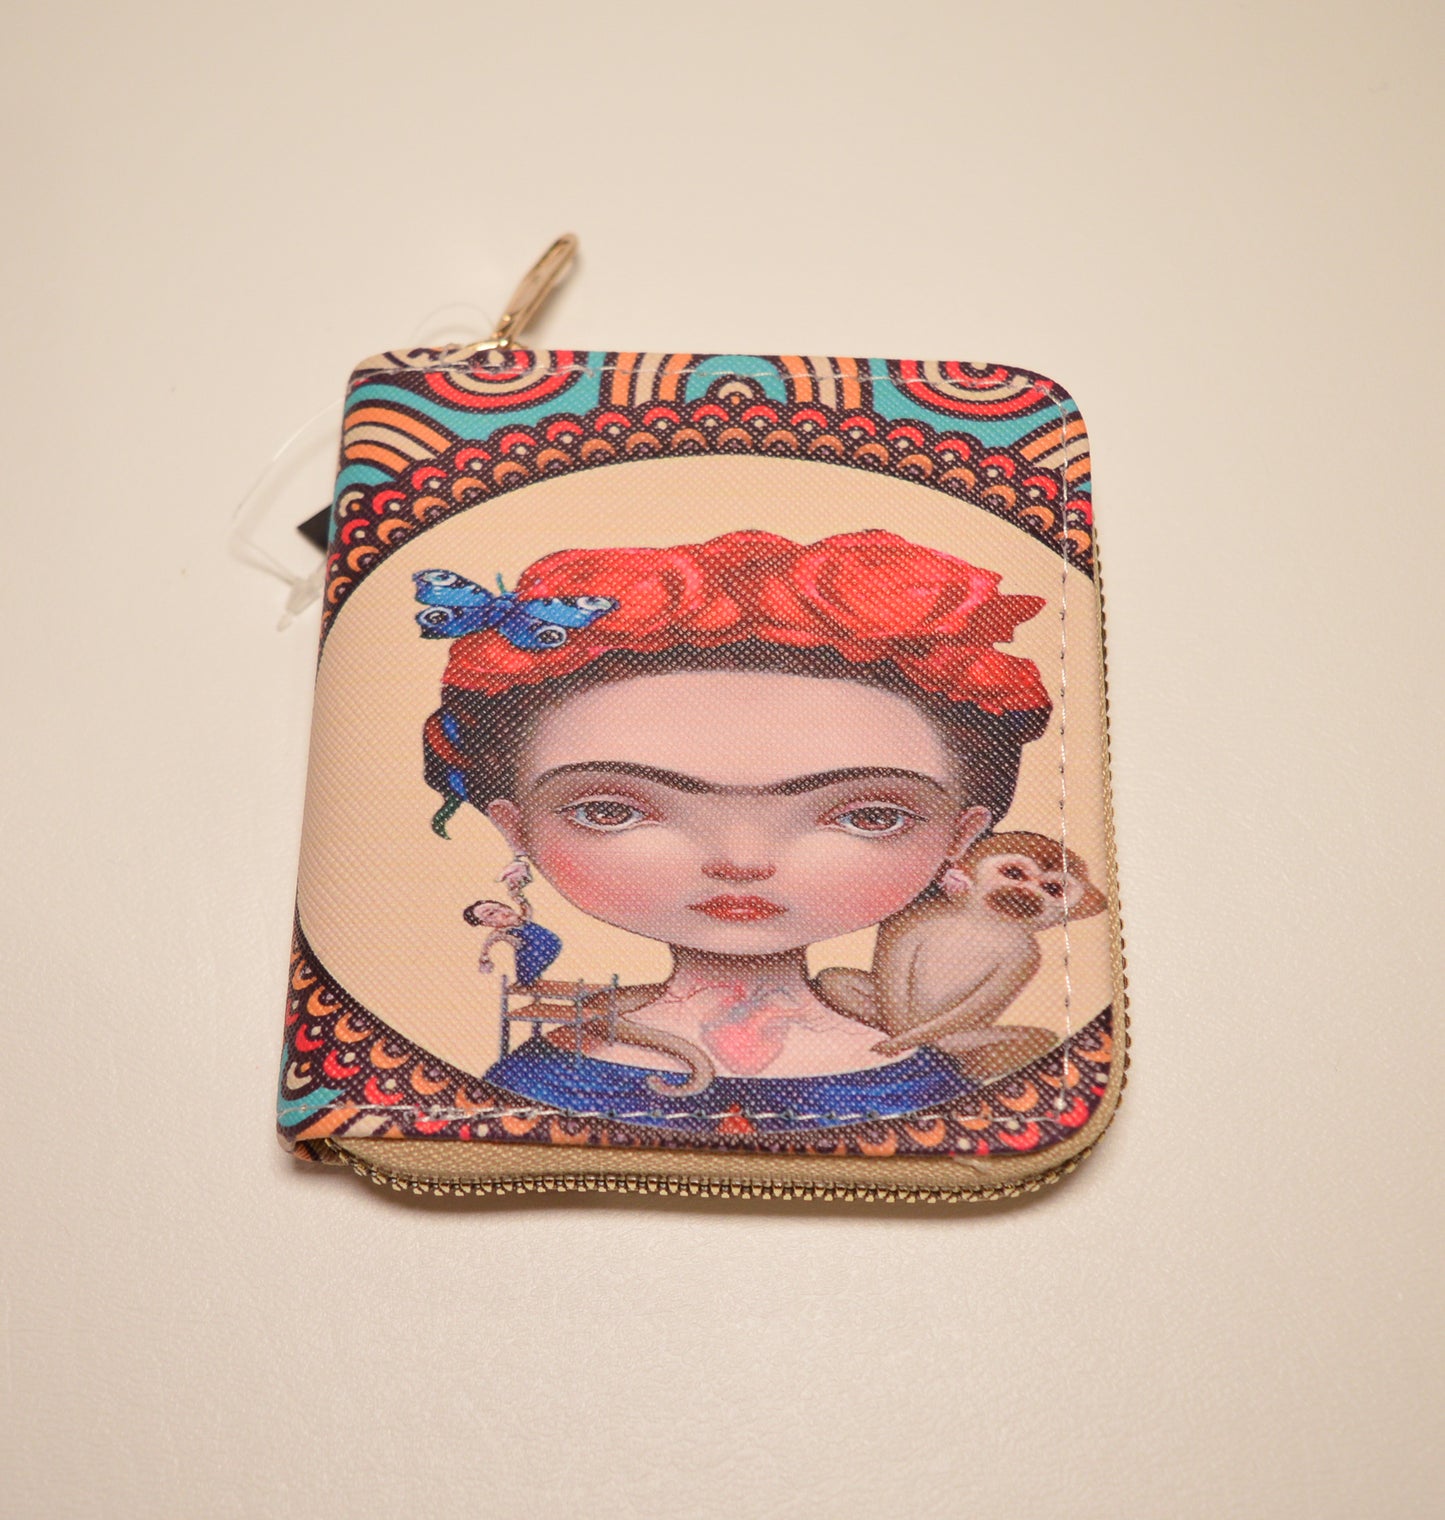 Firda kahlo wallet 4 inches by 4 inches. White